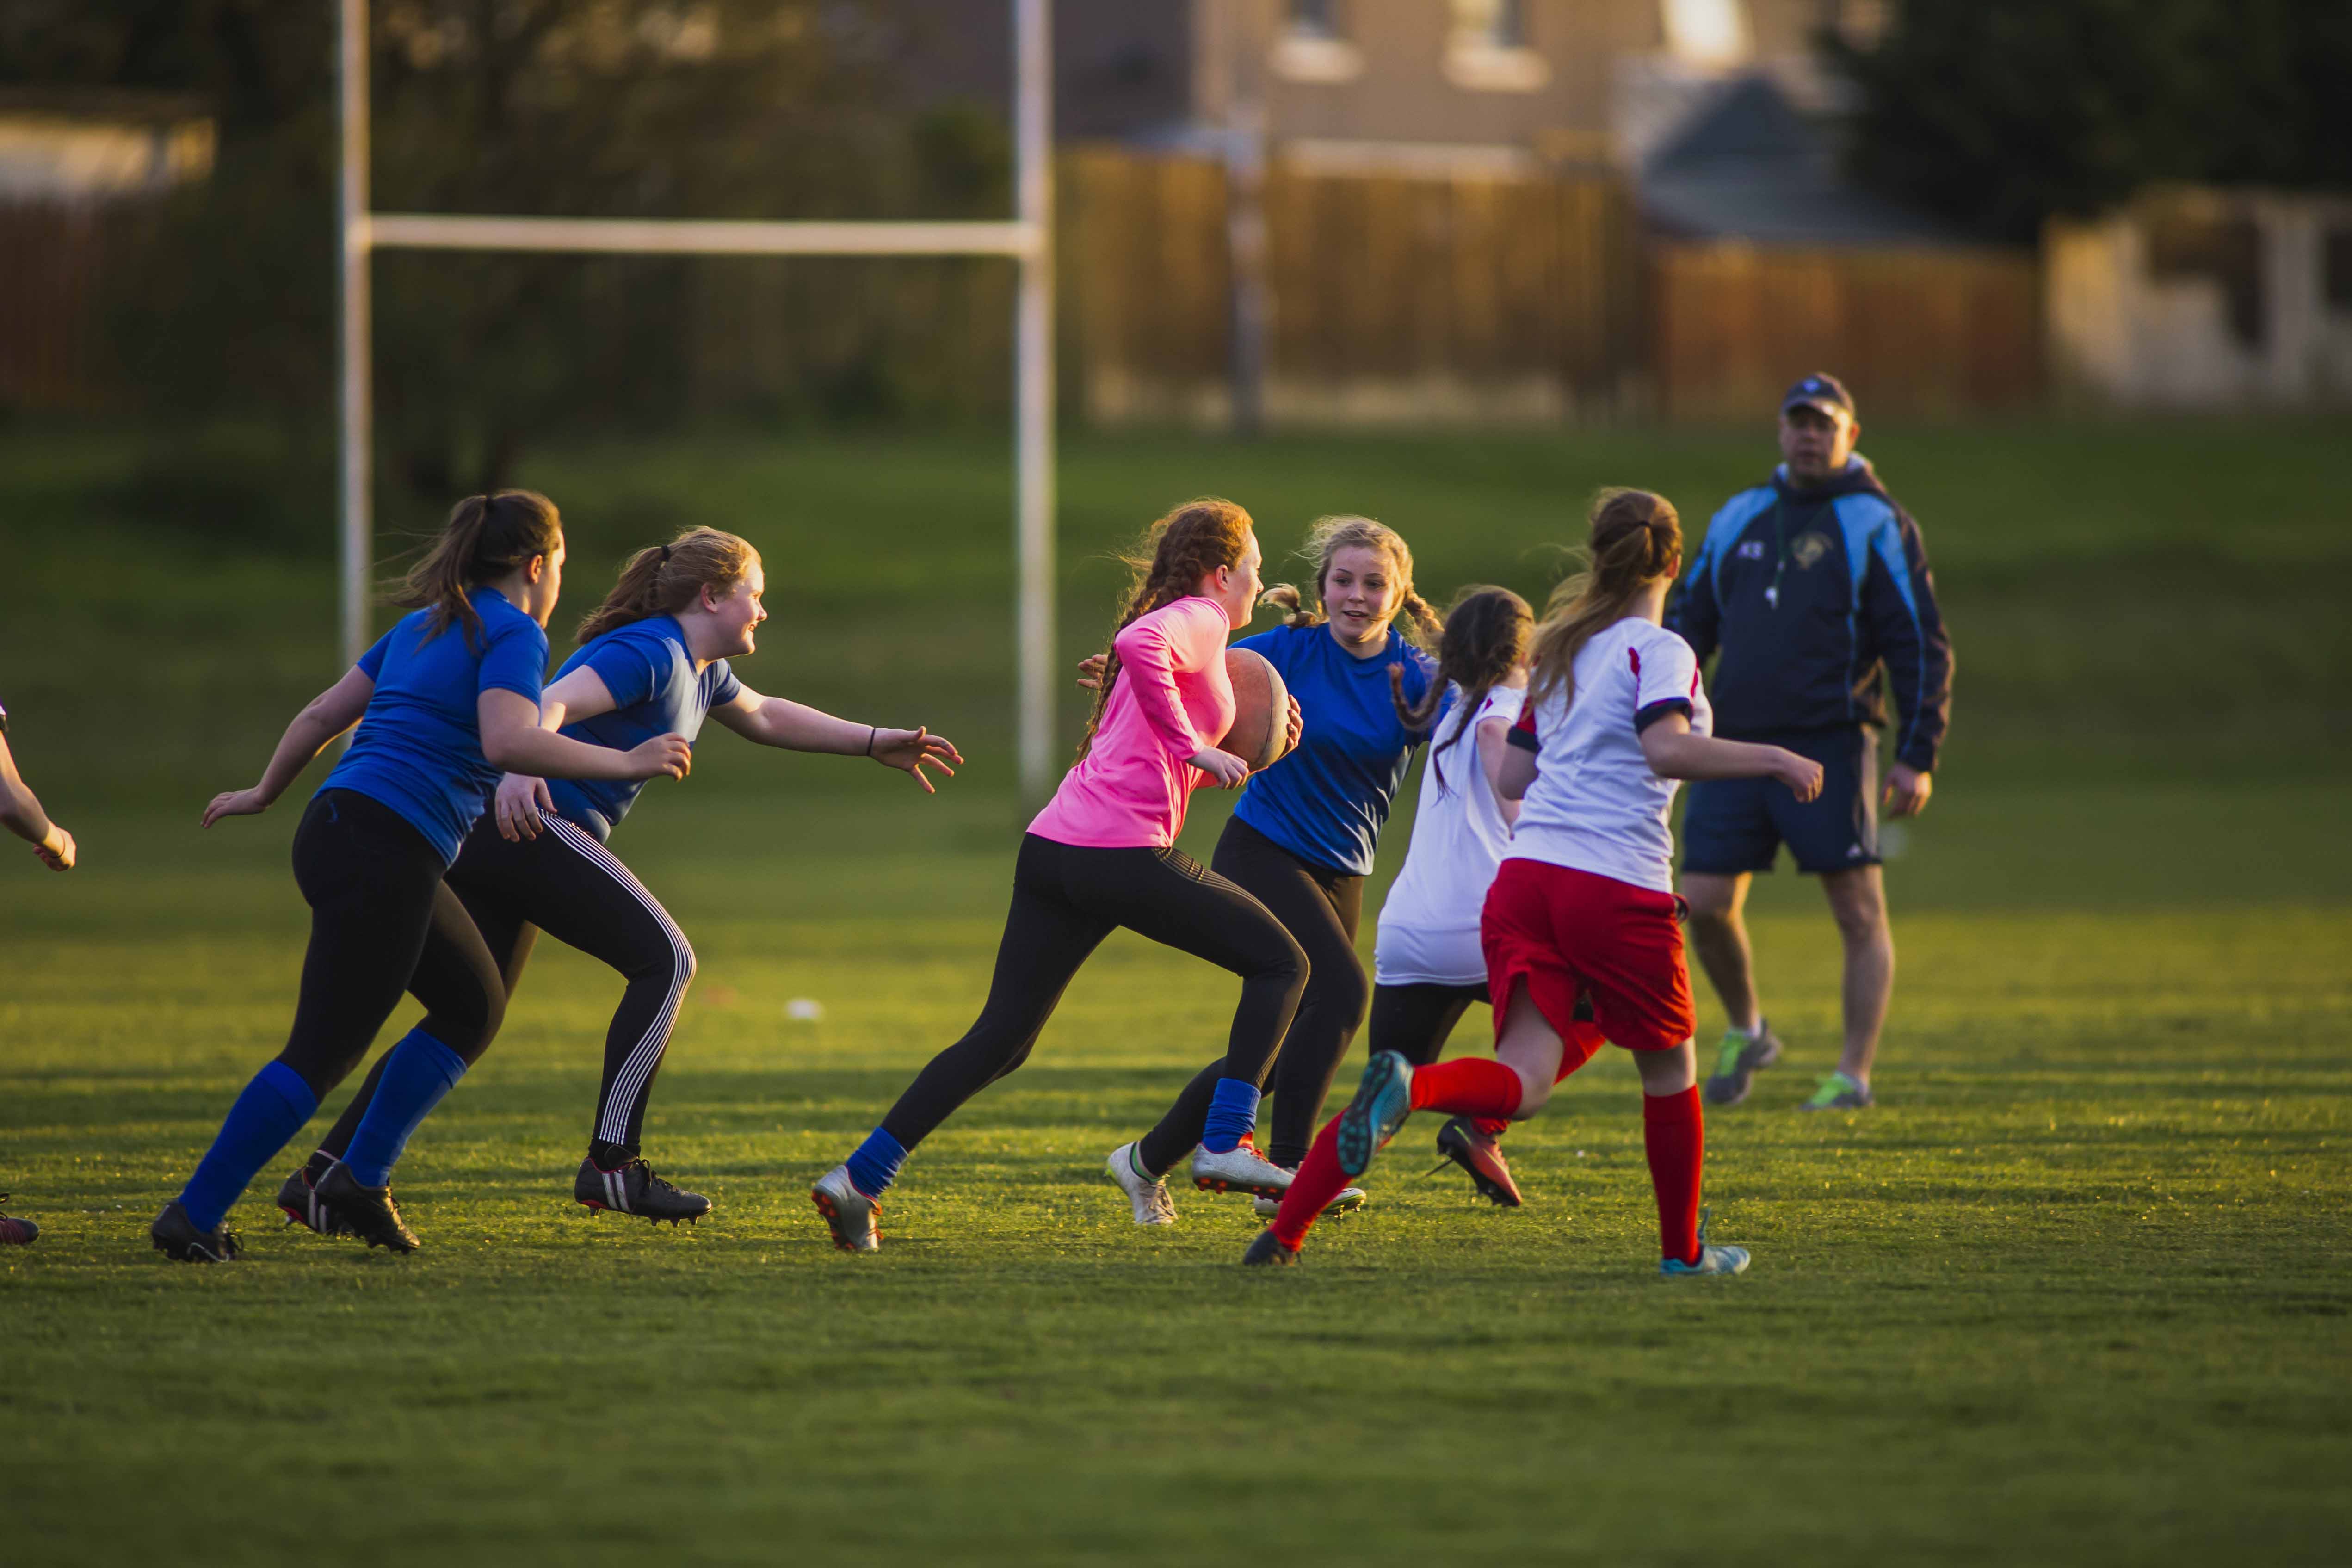 High impact sport in schools should be regulated, say researchers